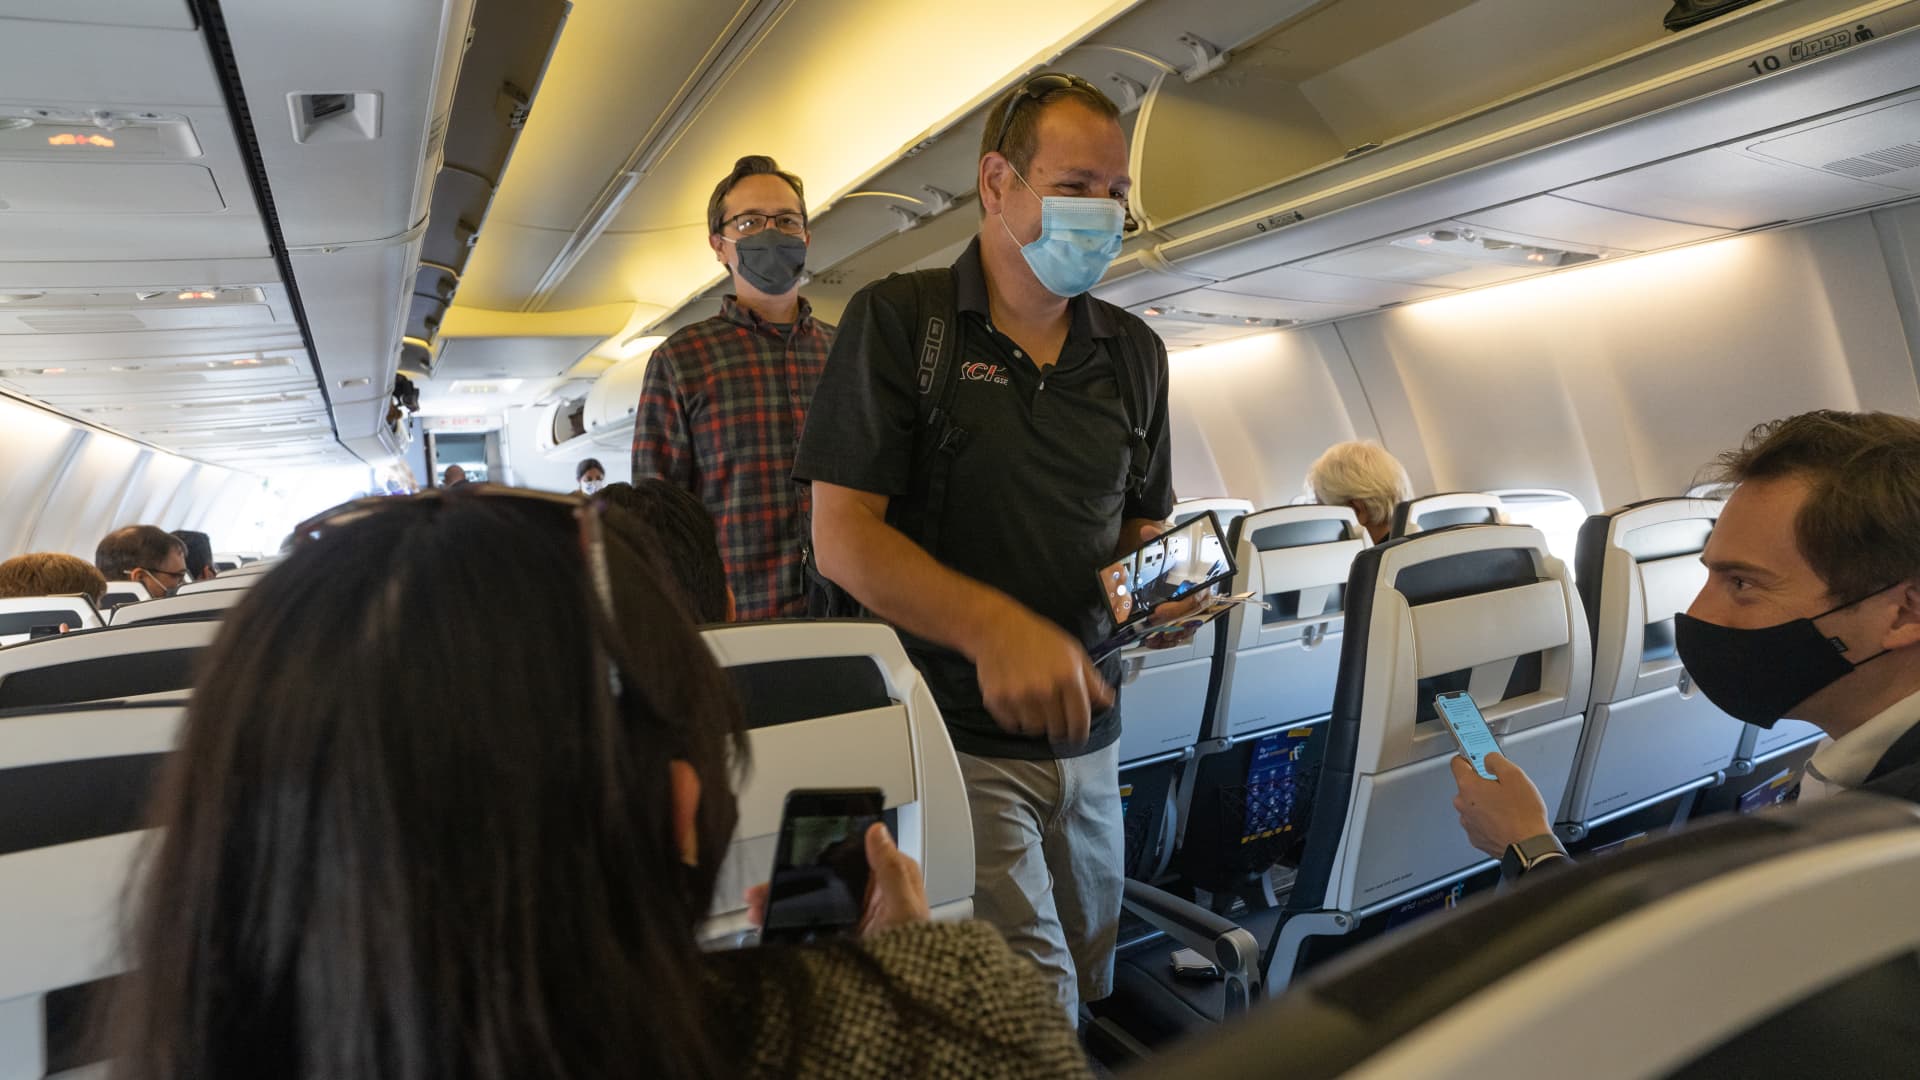 The FAA maintains zero tolerance for unruly passengers even after